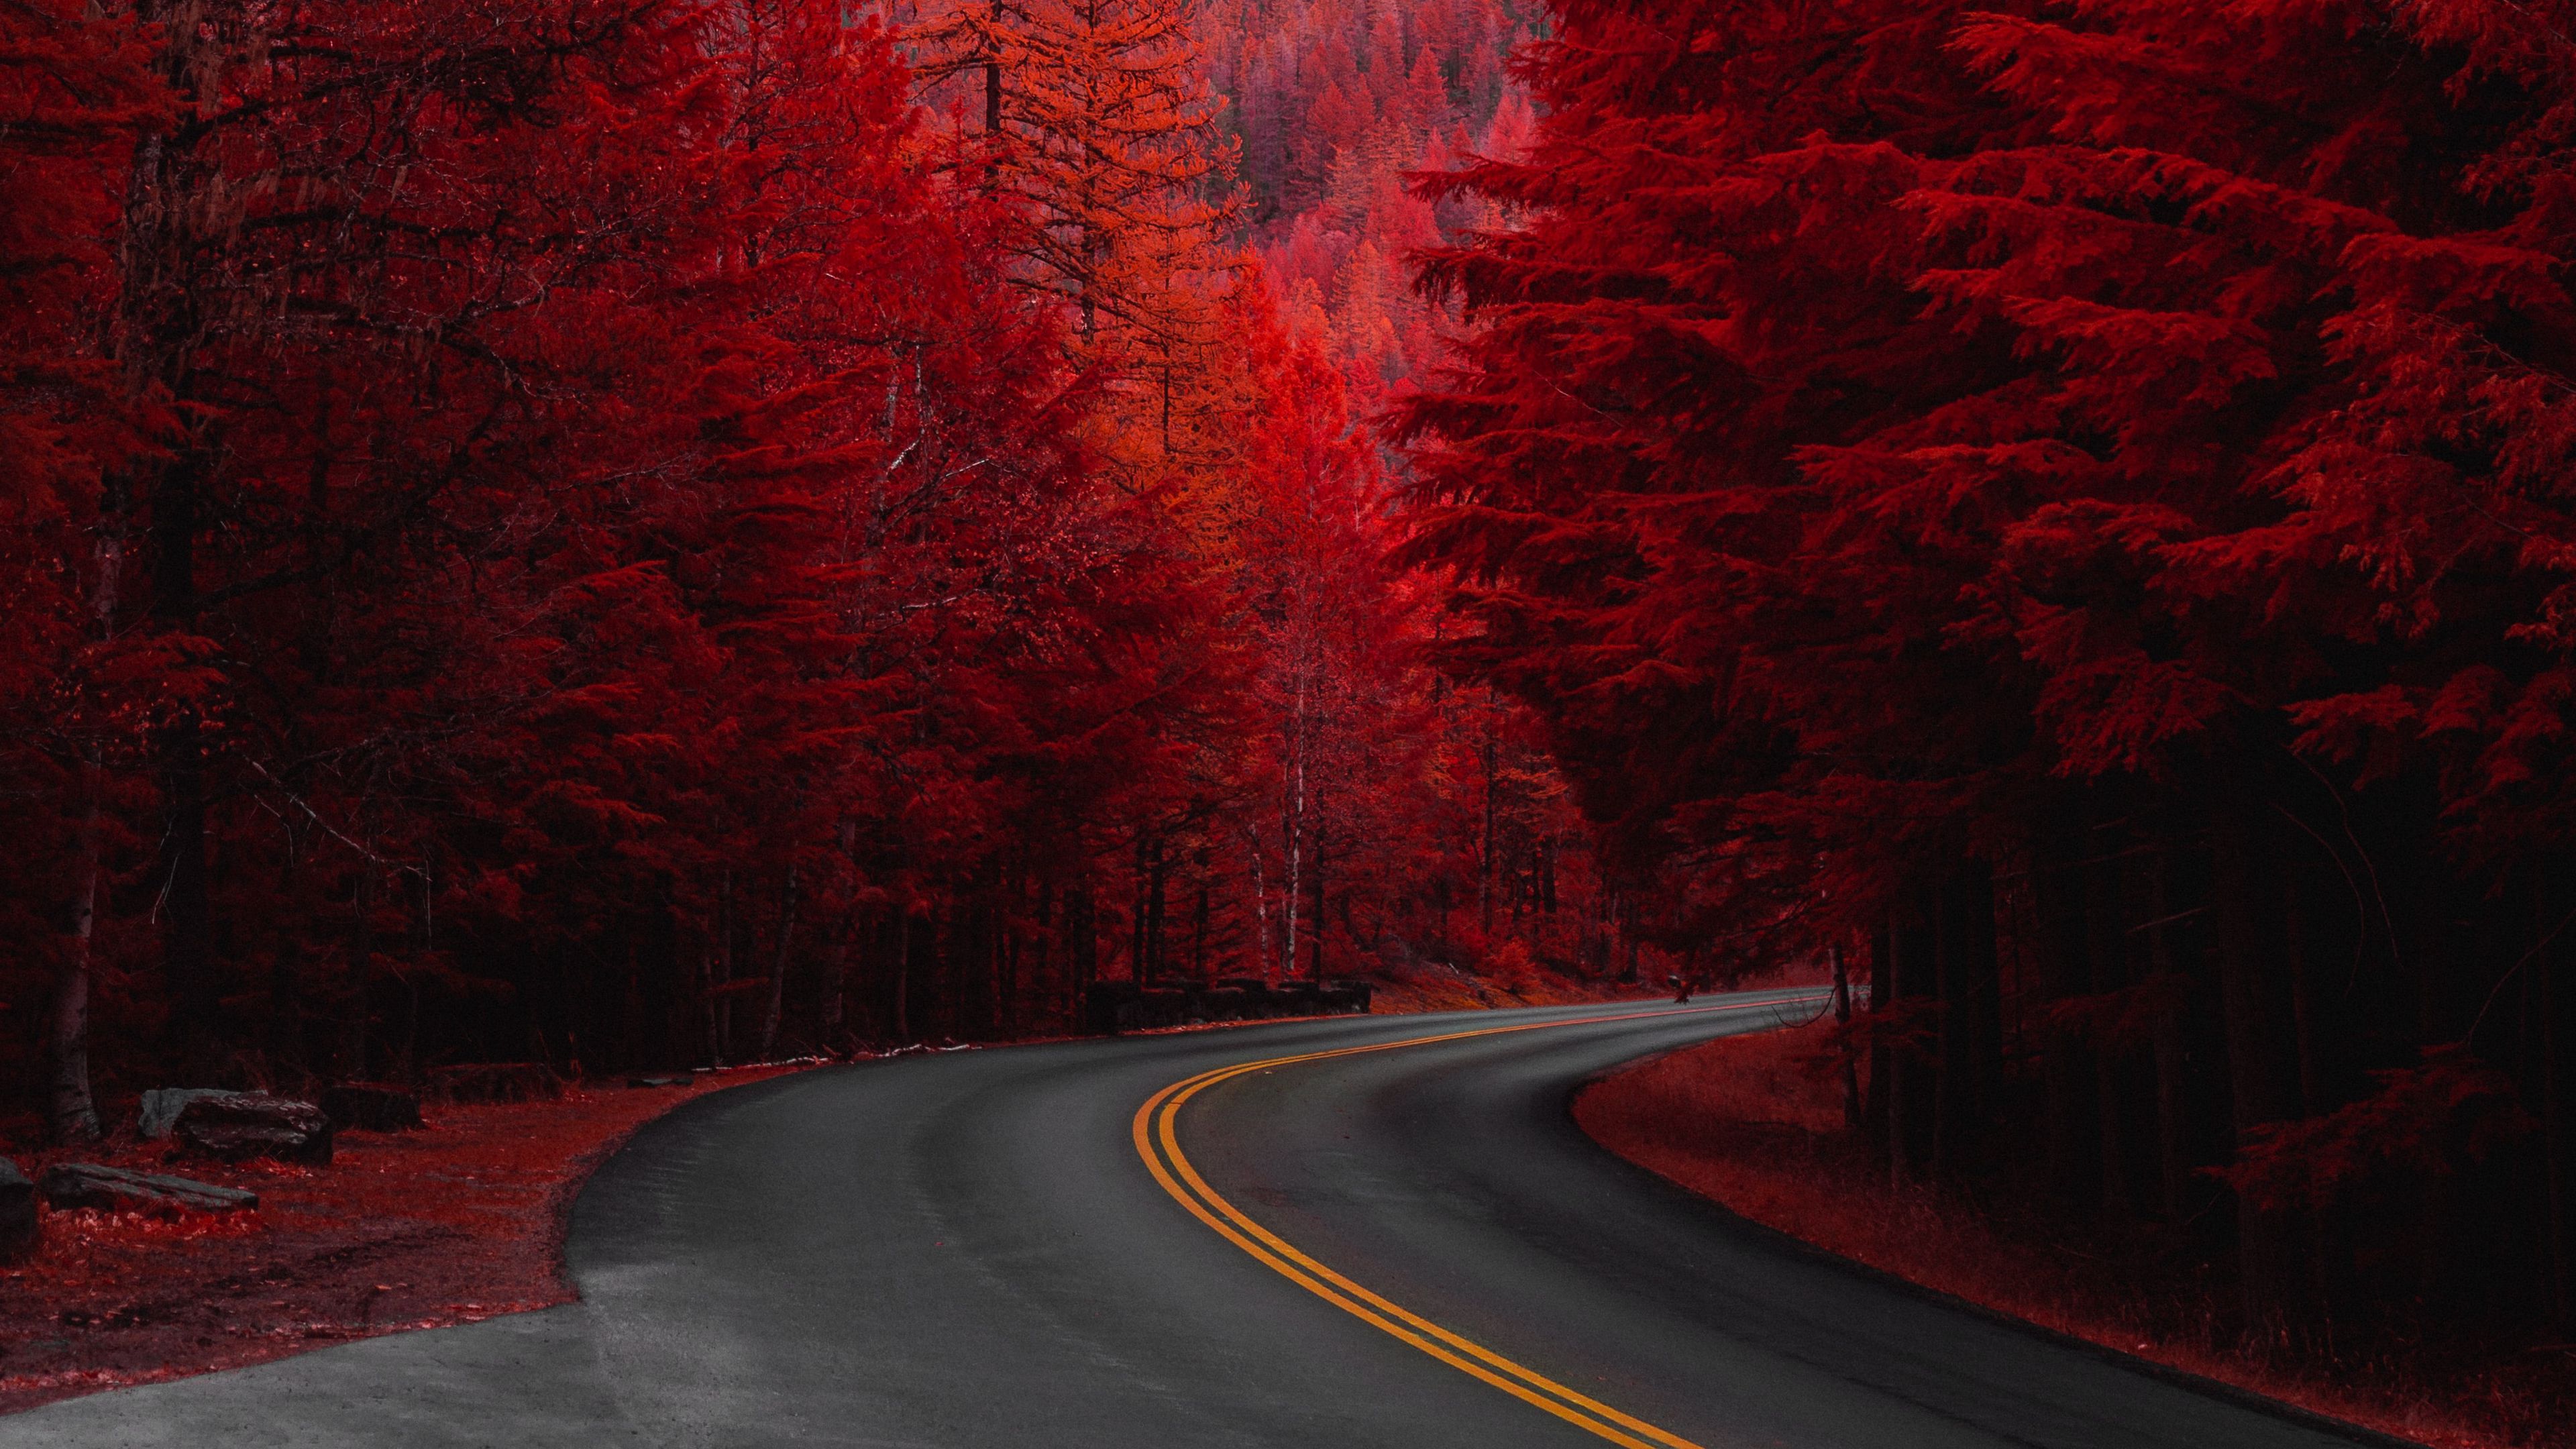 Download wallpaper 3840x2160 road, turn, trees, red, mountain, landscape 4k  uhd 16:9 hd background